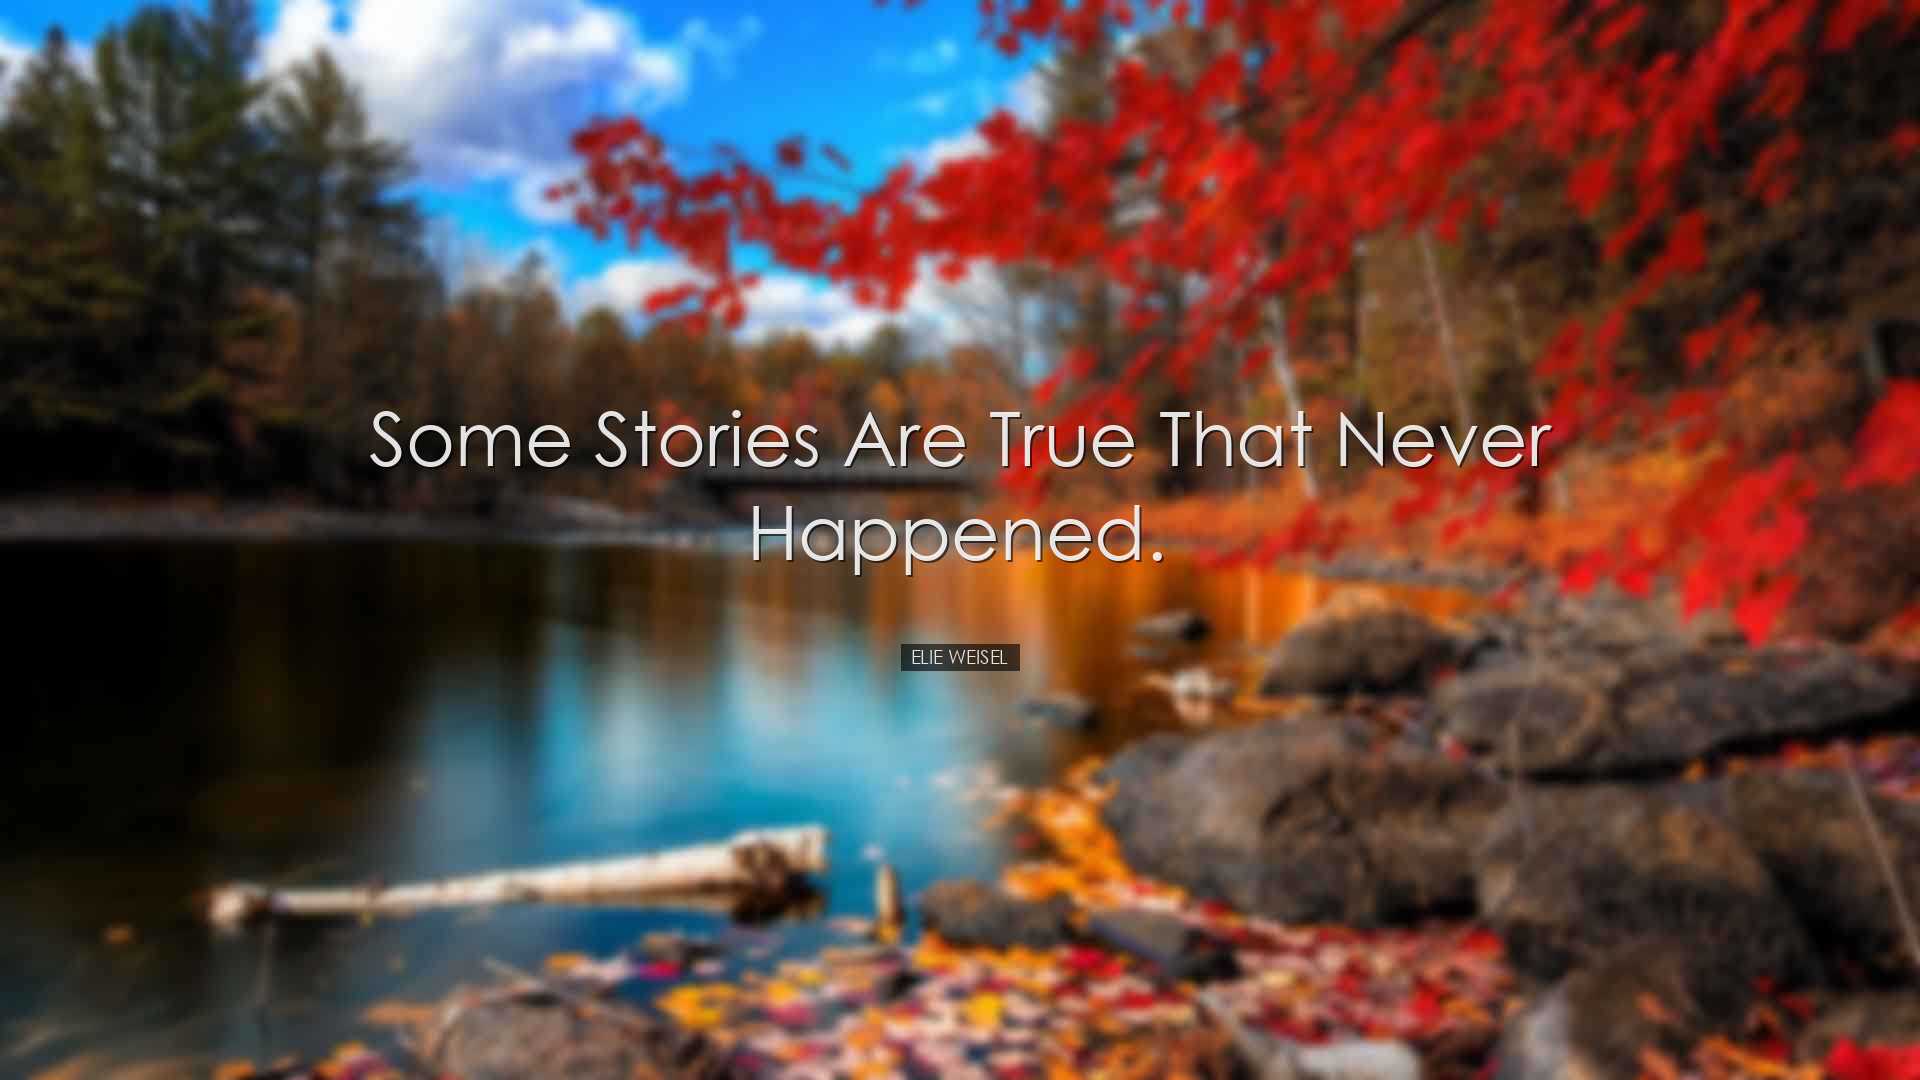 Some stories are true that never happened. - Elie Weisel